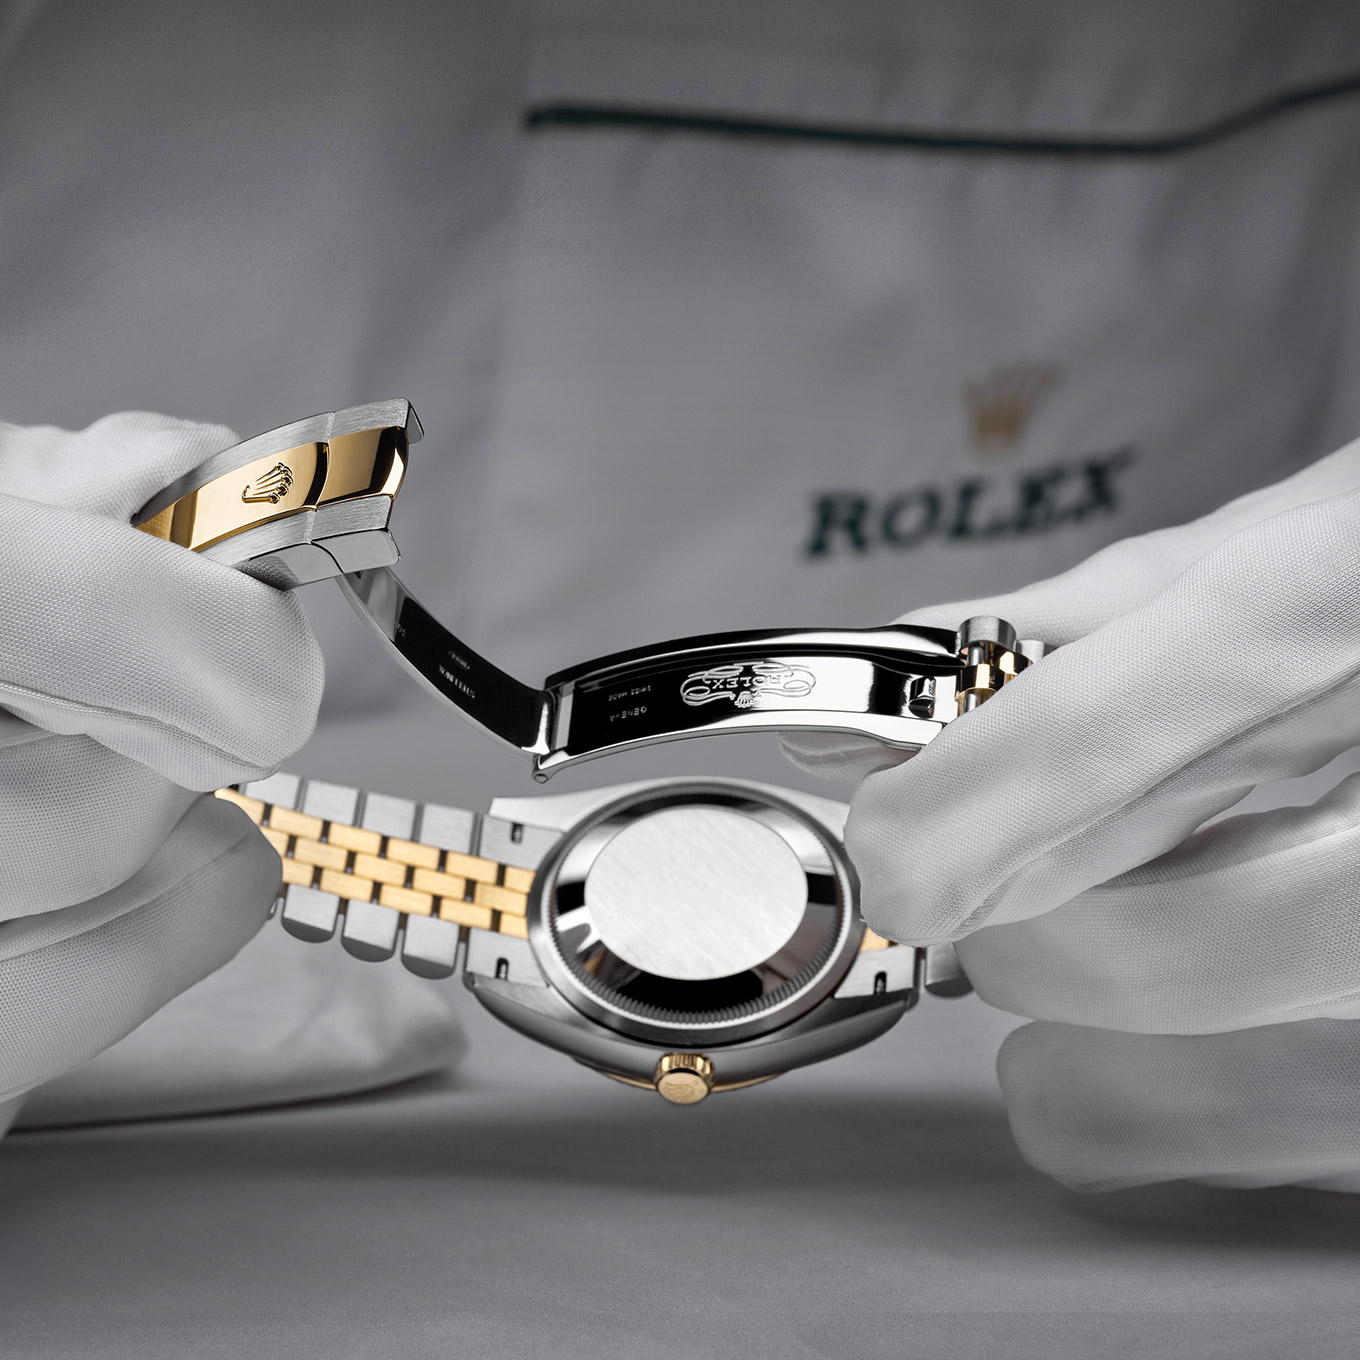 Rolex servicing at Haltom's Fine Jewelers in Forth Worth, TX